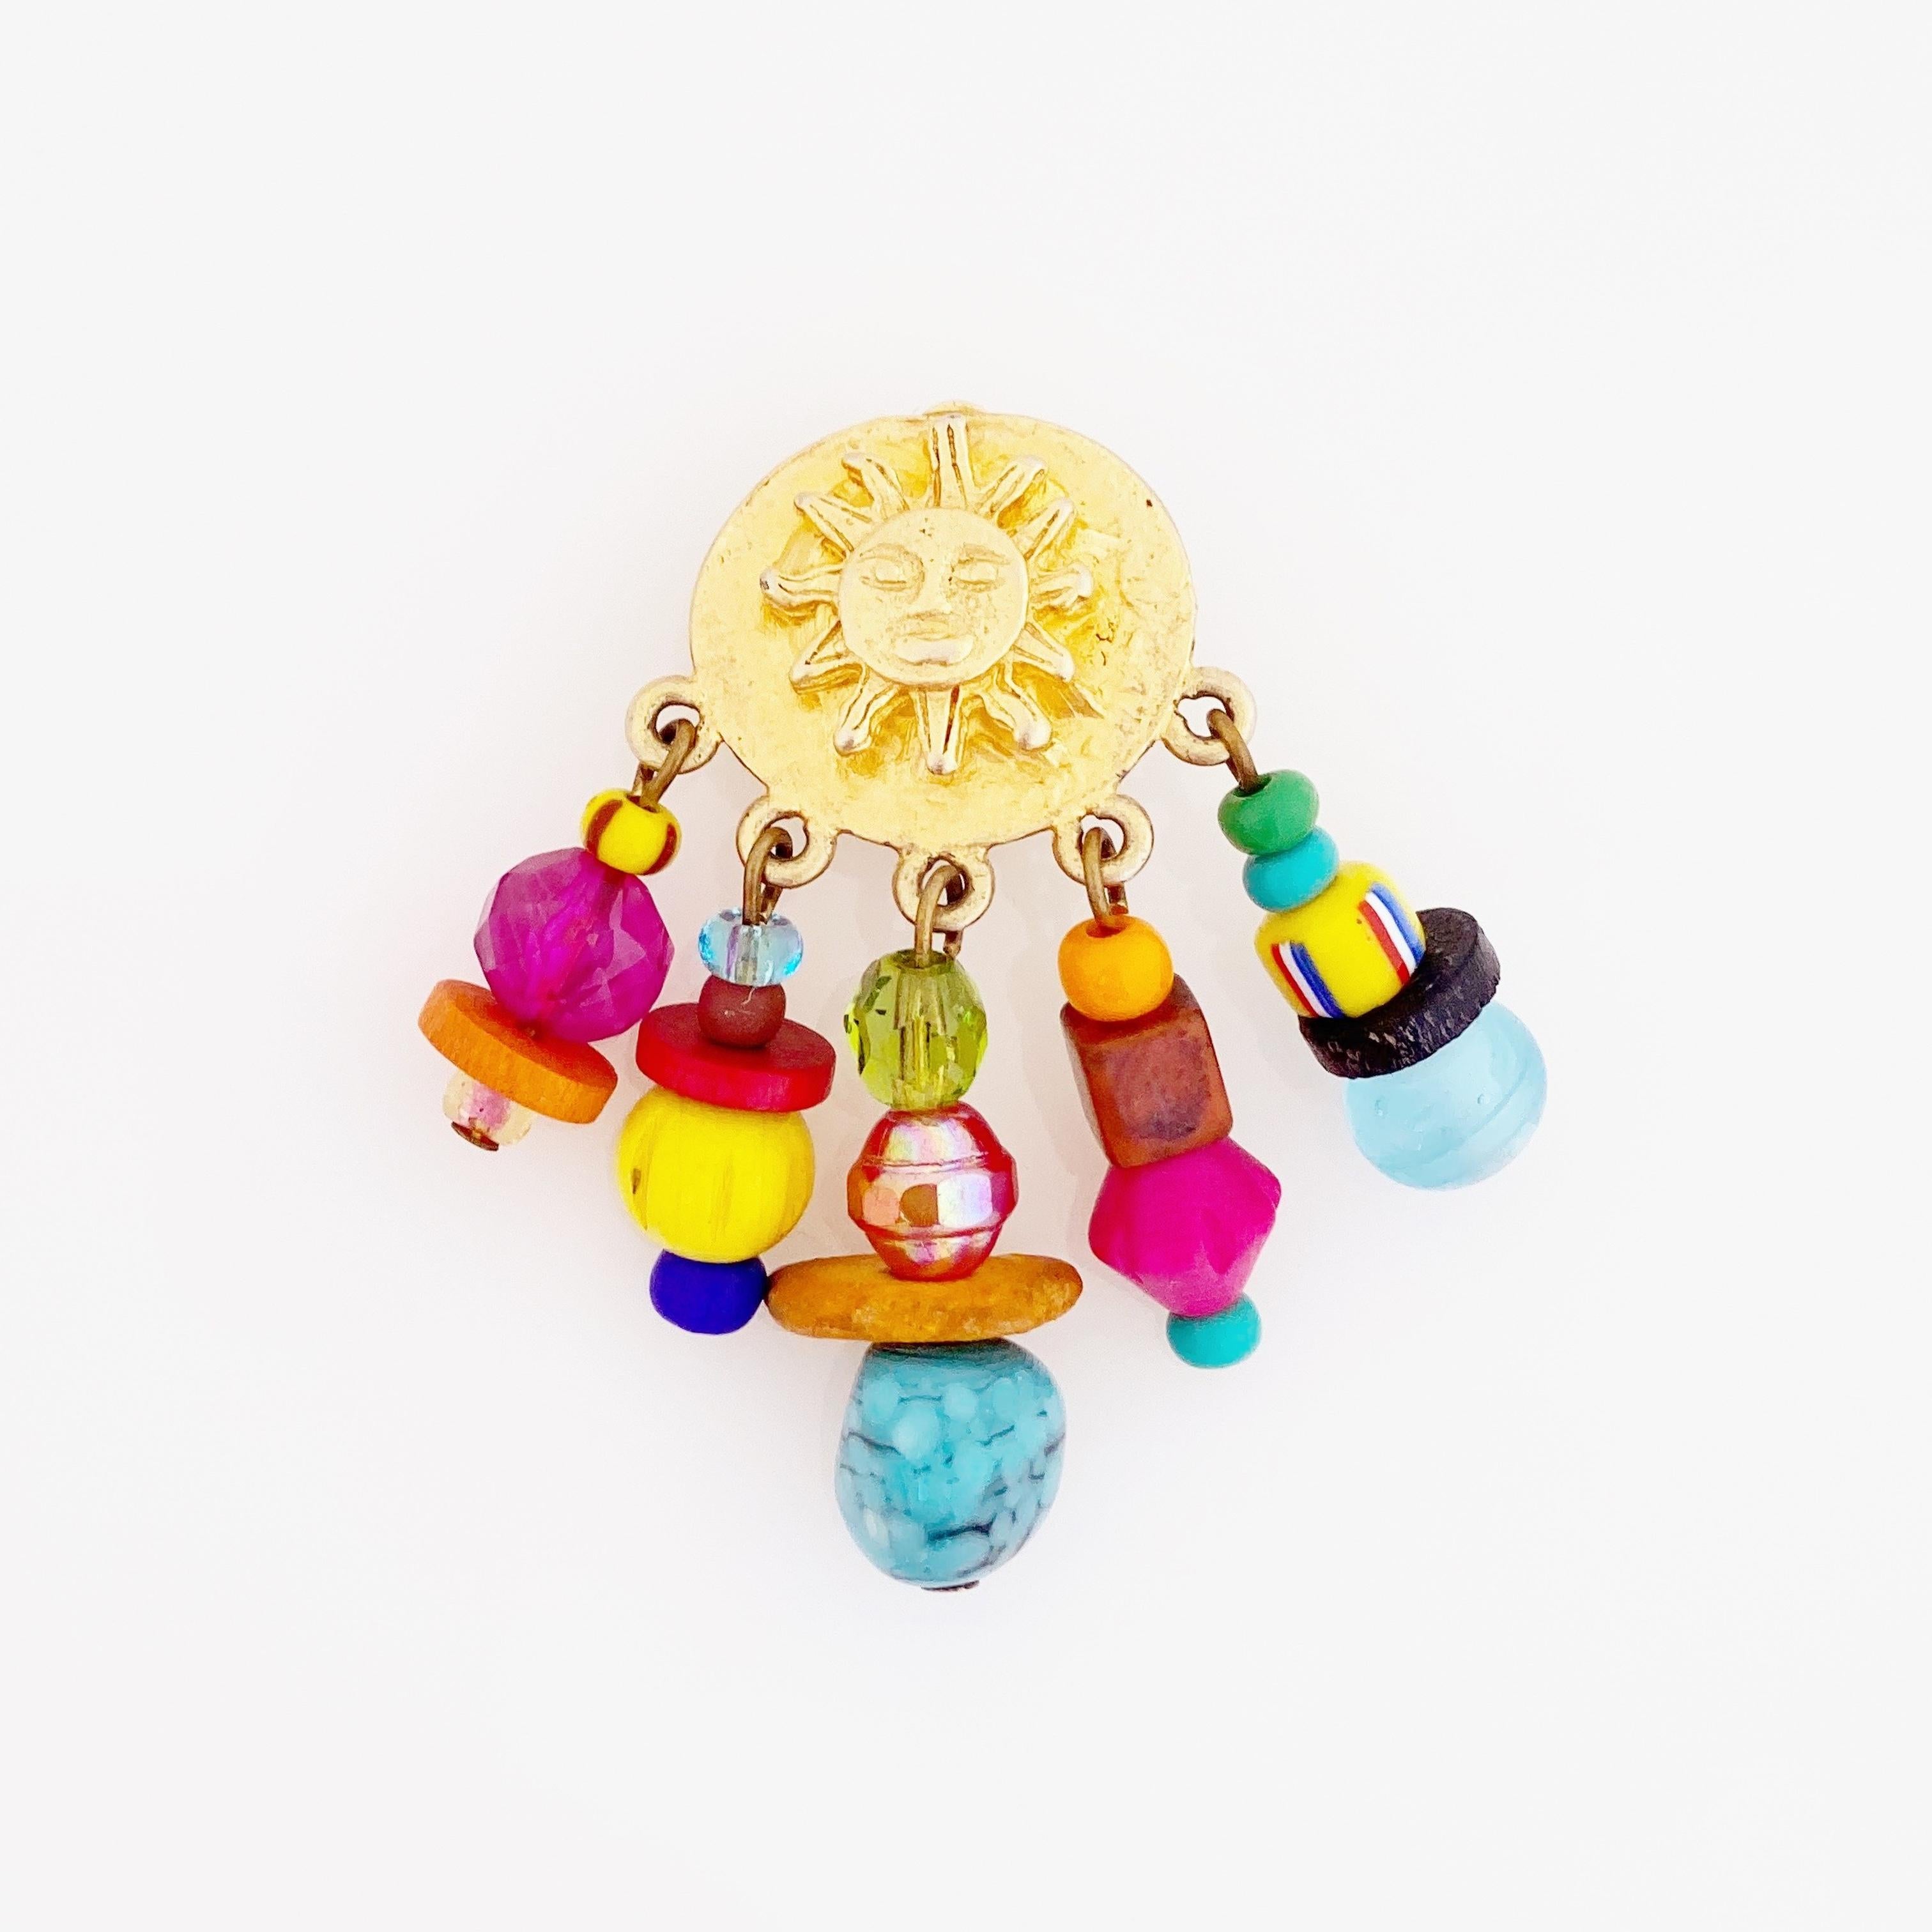 Modern Gold Sun Disc Earrings With Colorful Bead Dangles By RJ Graziano, 1990s